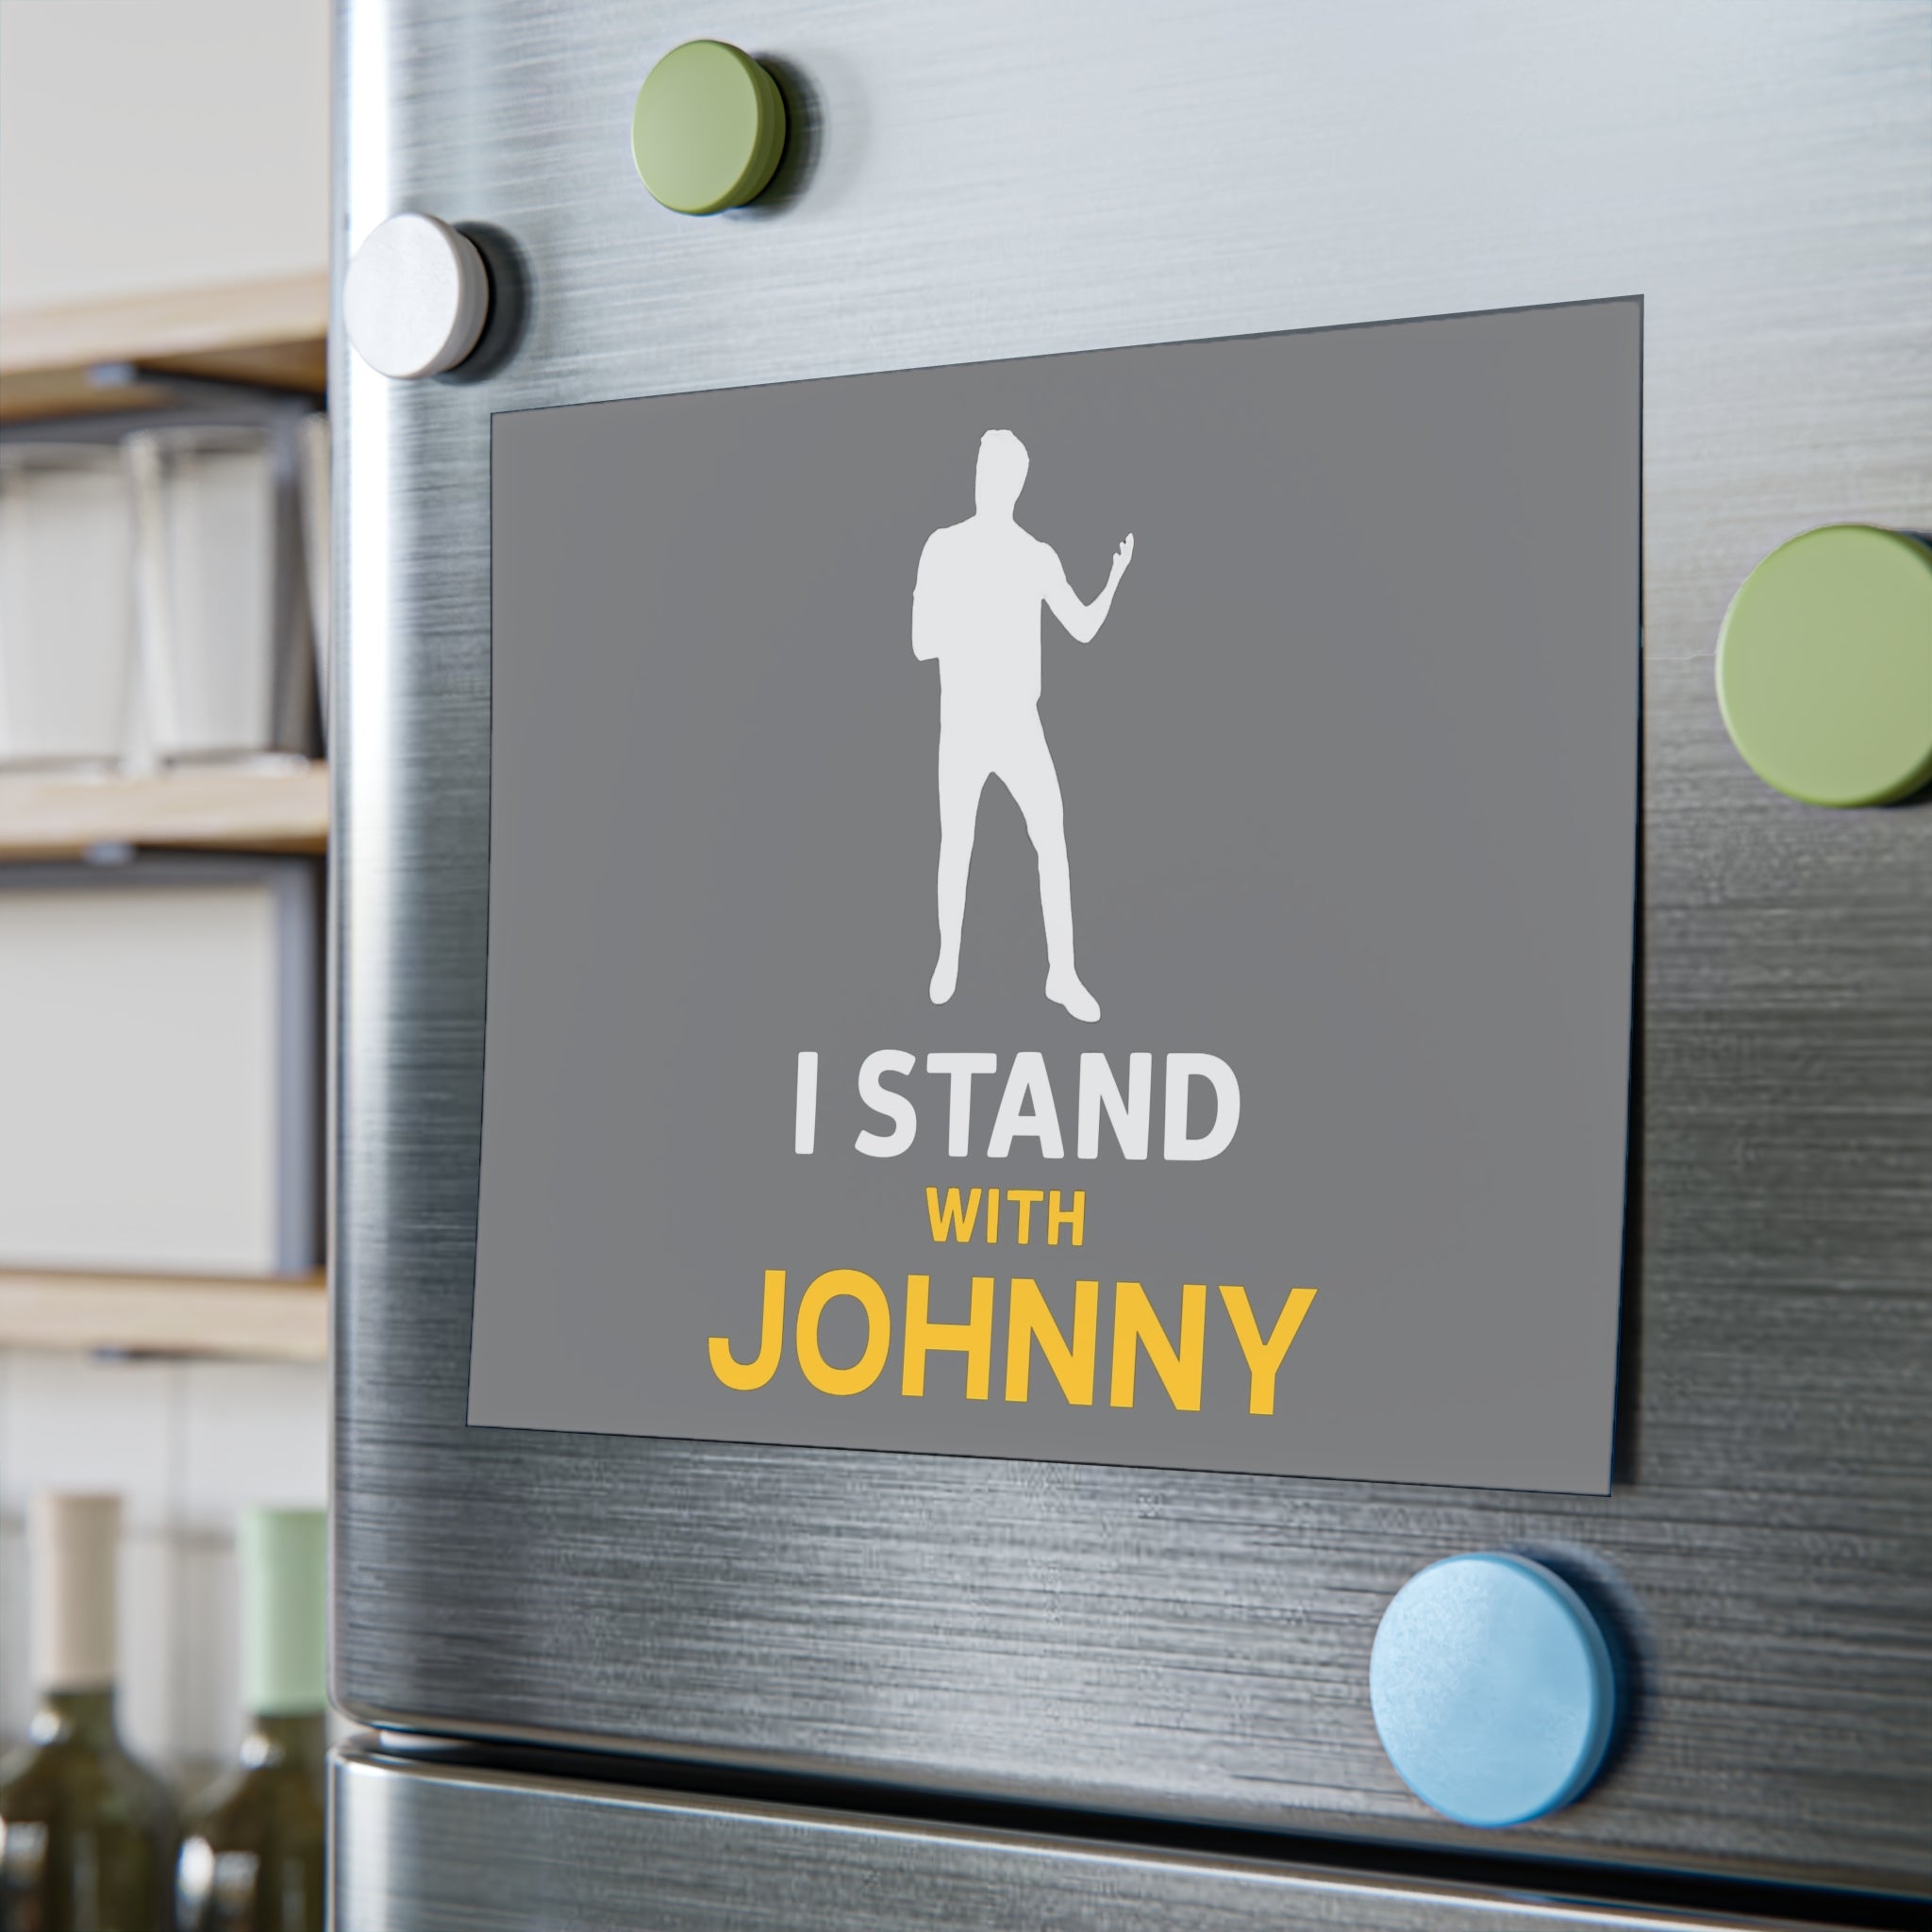 I stand With Johnny Post-it® Note Pads